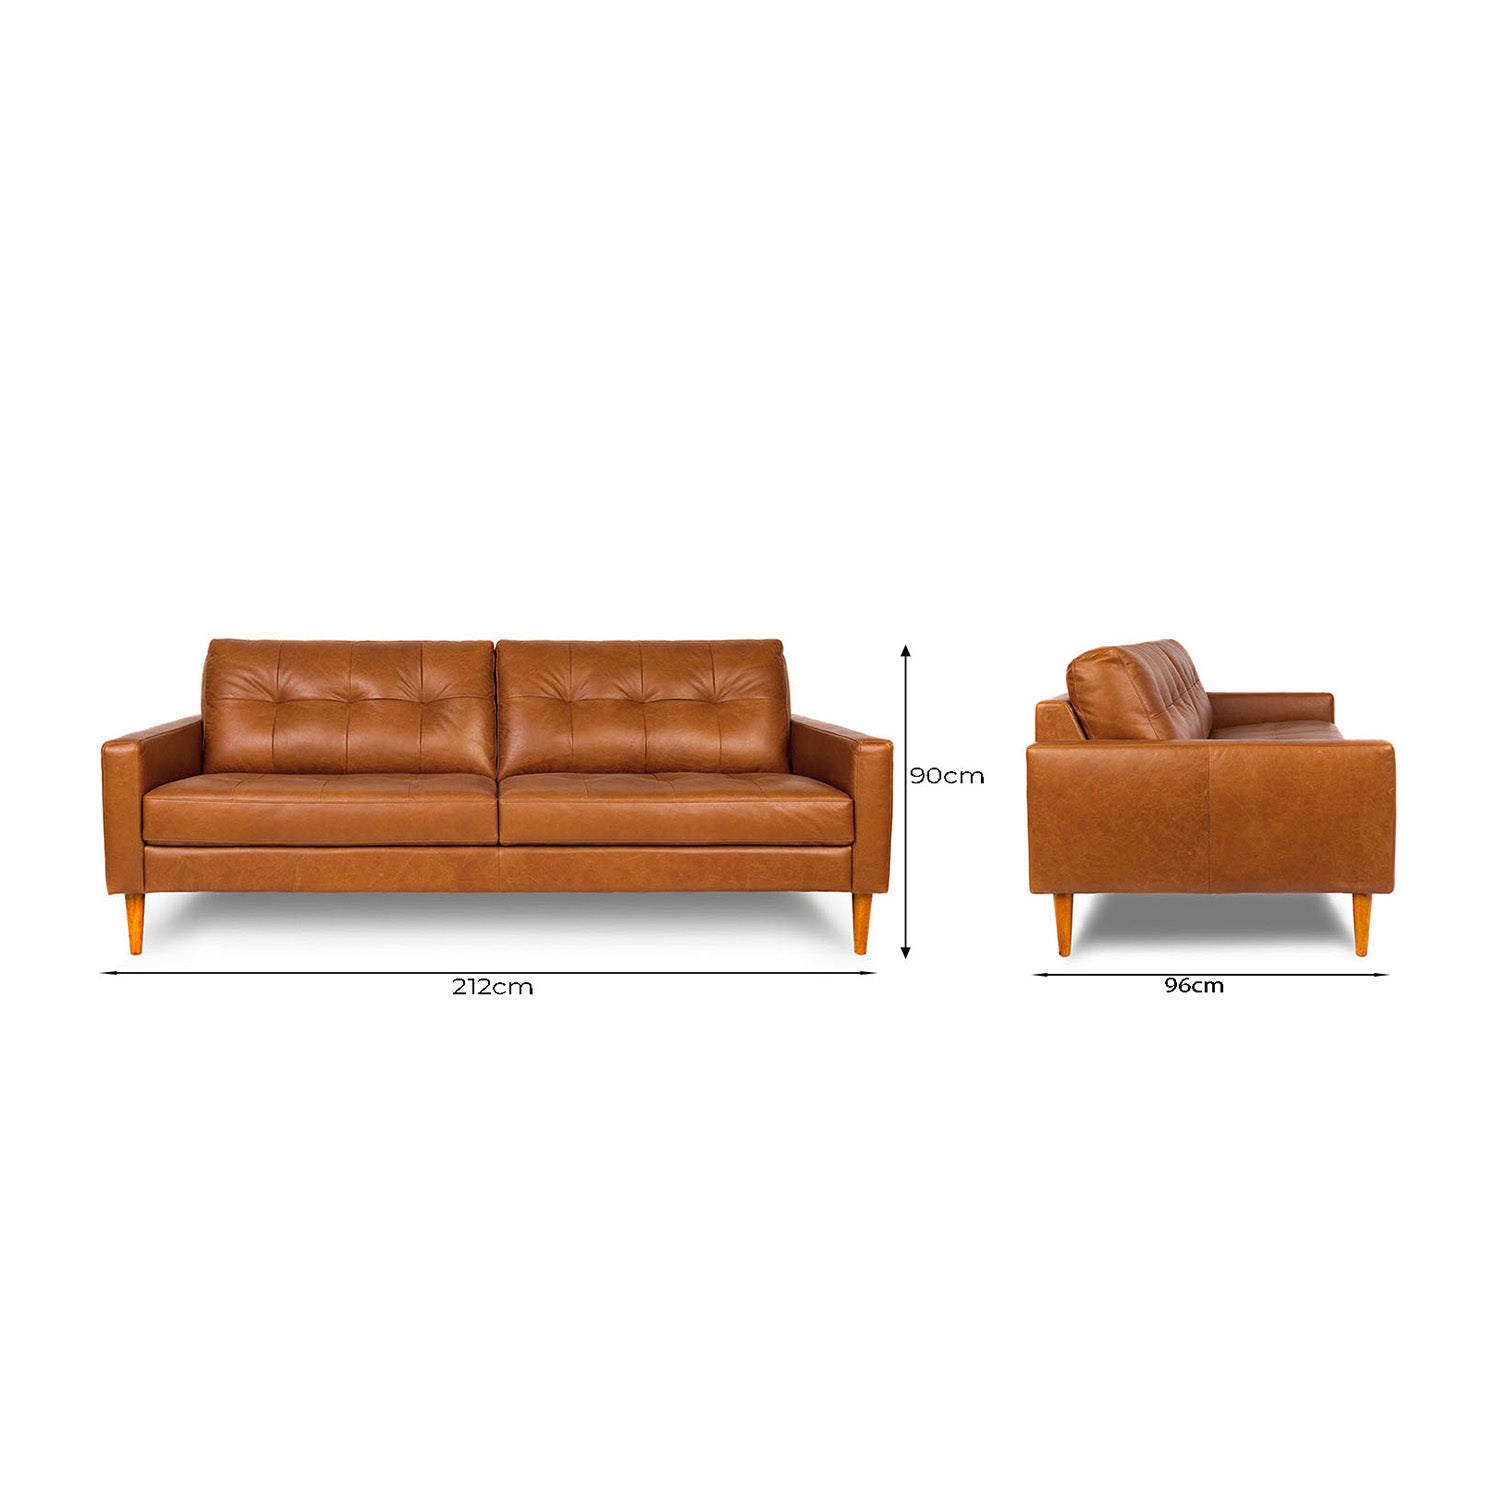 Classic Leather 3 Seat Sofa in Vintage Honey